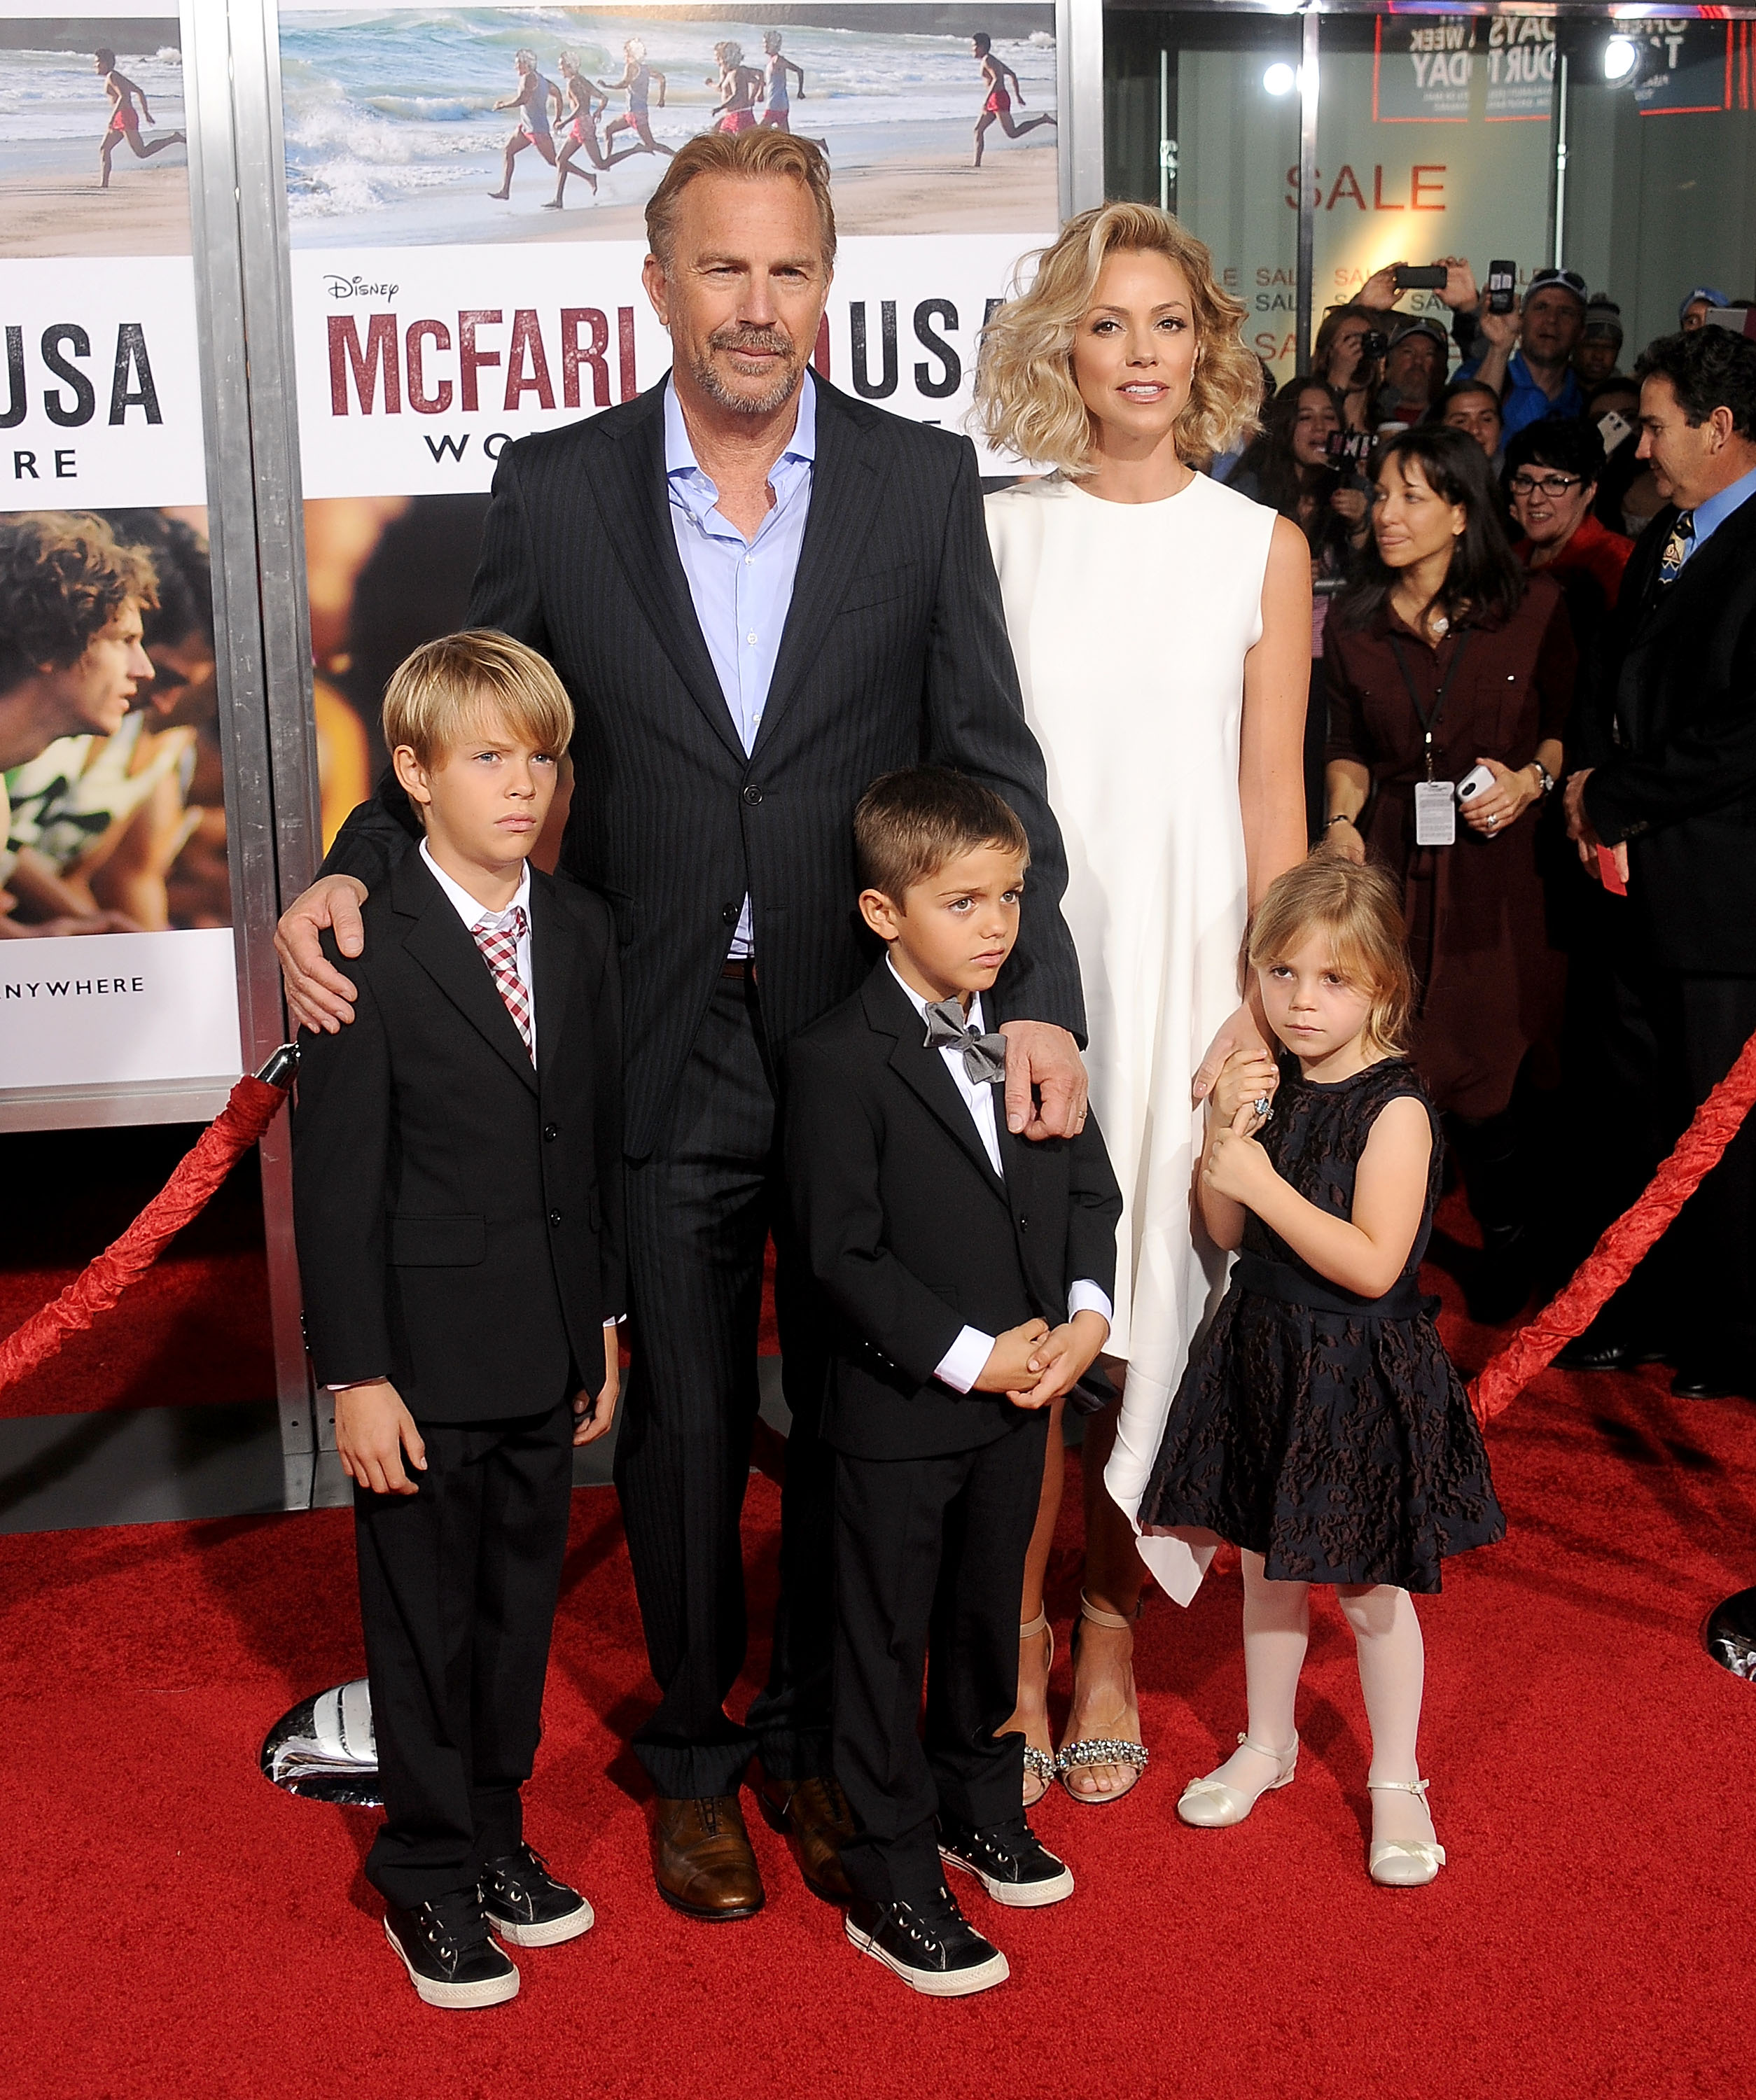 Kevin Costner, wife Christine Baumgartner, and children, Grace Avery Costner, Hayes Logan Costner, and Cayden Wyatt Costner, at the world premiere of Disney's "McFarland, USA" at the El Capitan Theatre in Hollywood, California, on February 9, 2015 | Source: Getty Images